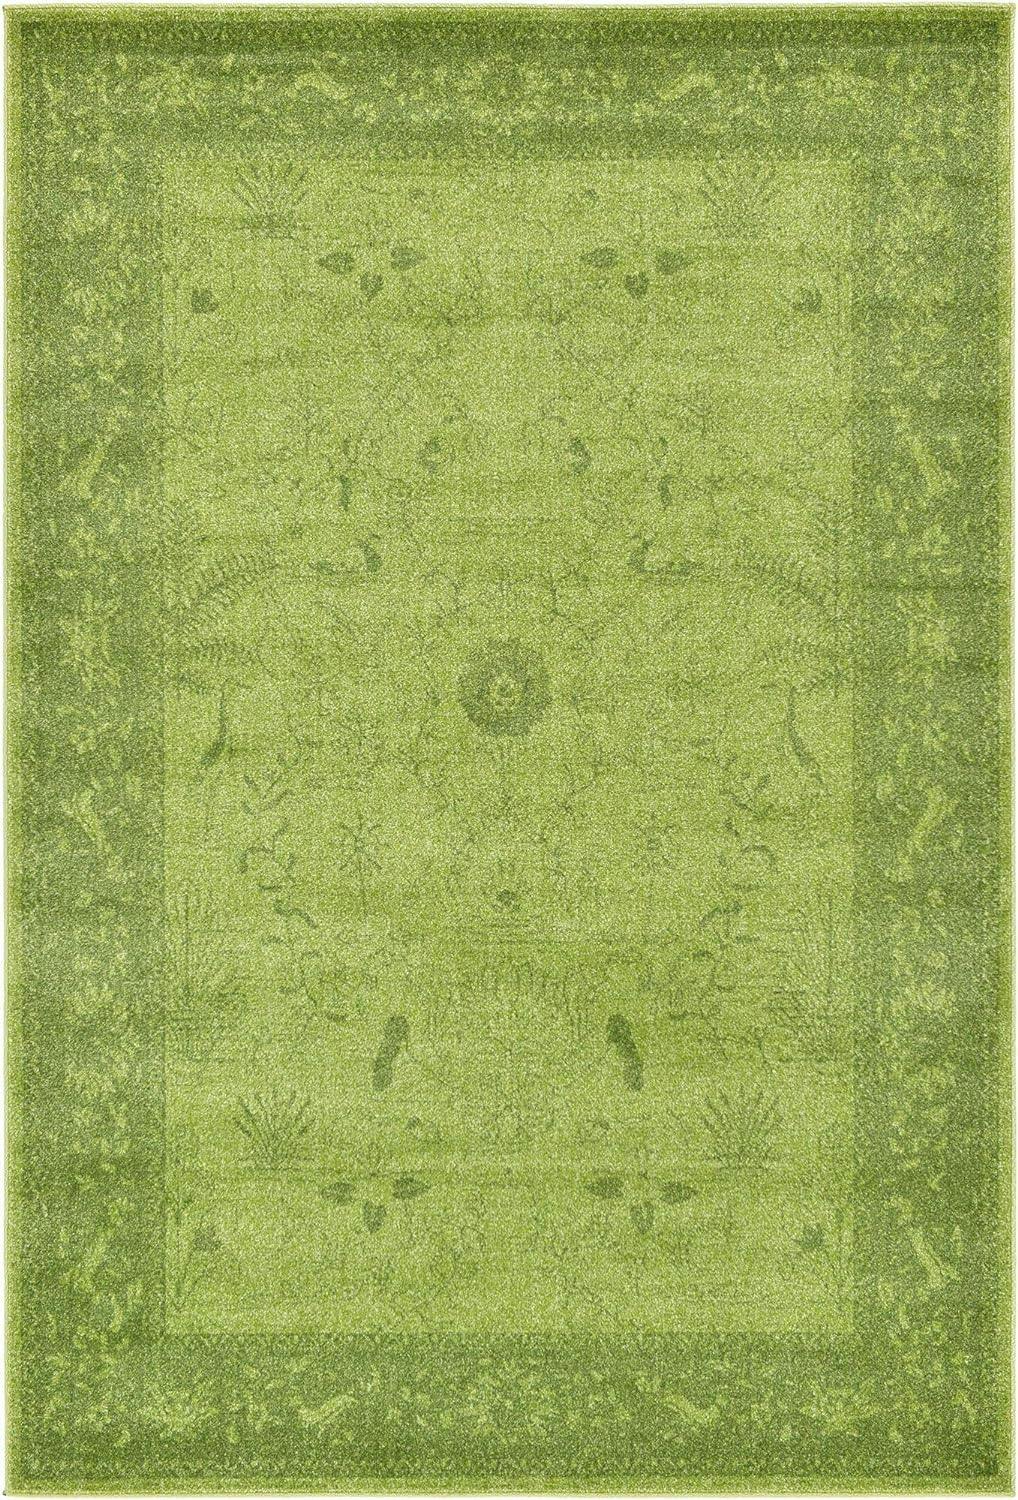 La Jolla Green Floral Synthetic Easy-Care Area Rug 6' x 9'